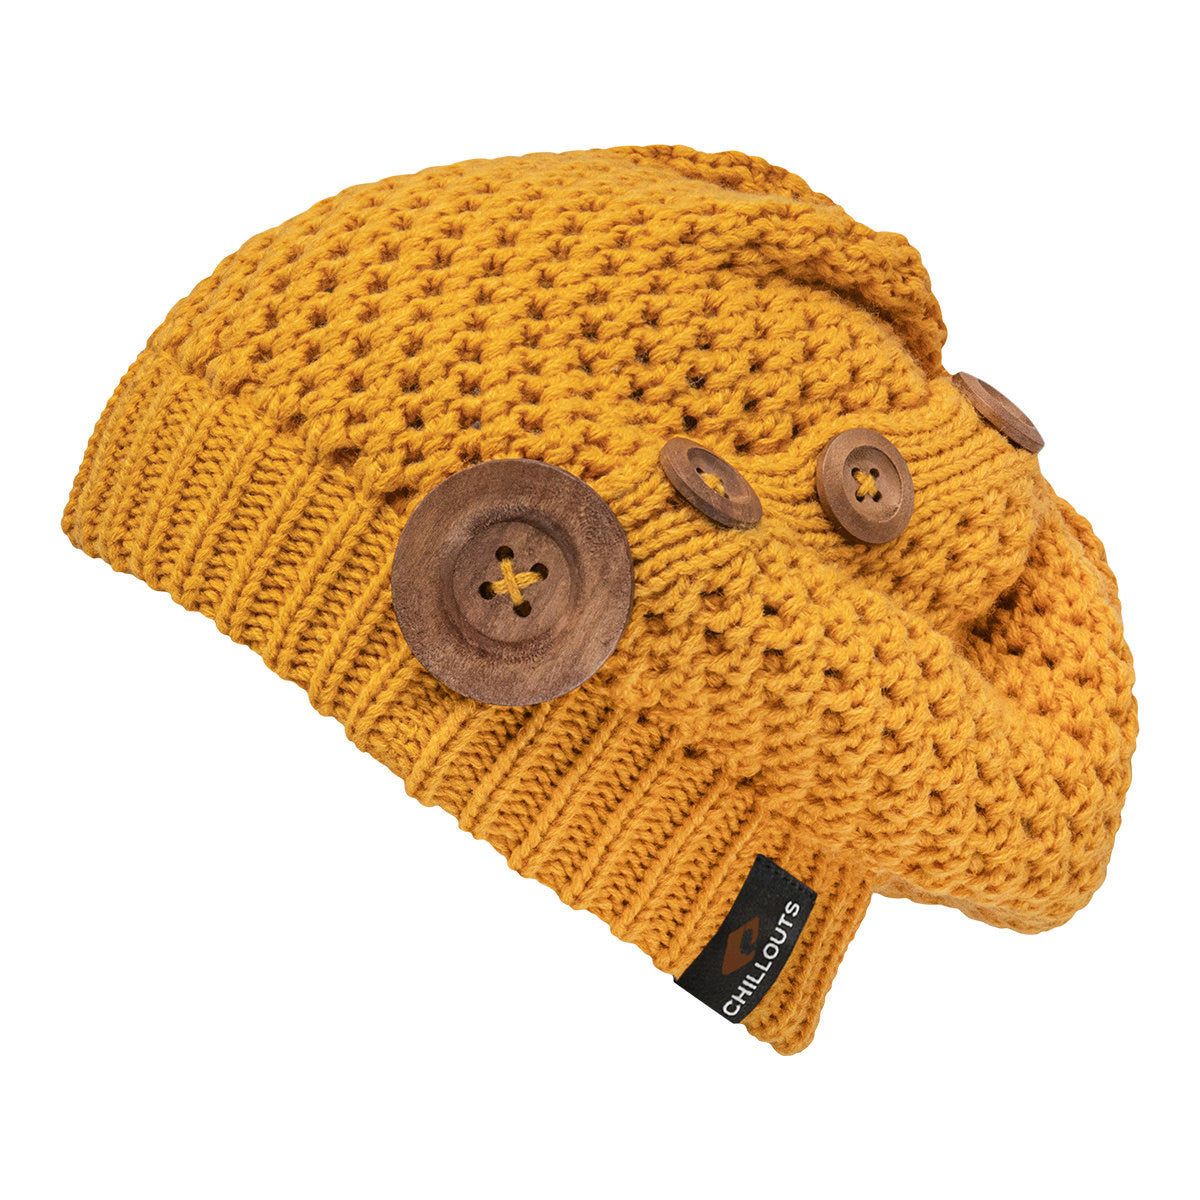 Long beanie with hole knit pattern for women - order now! – Chillouts  Headwear